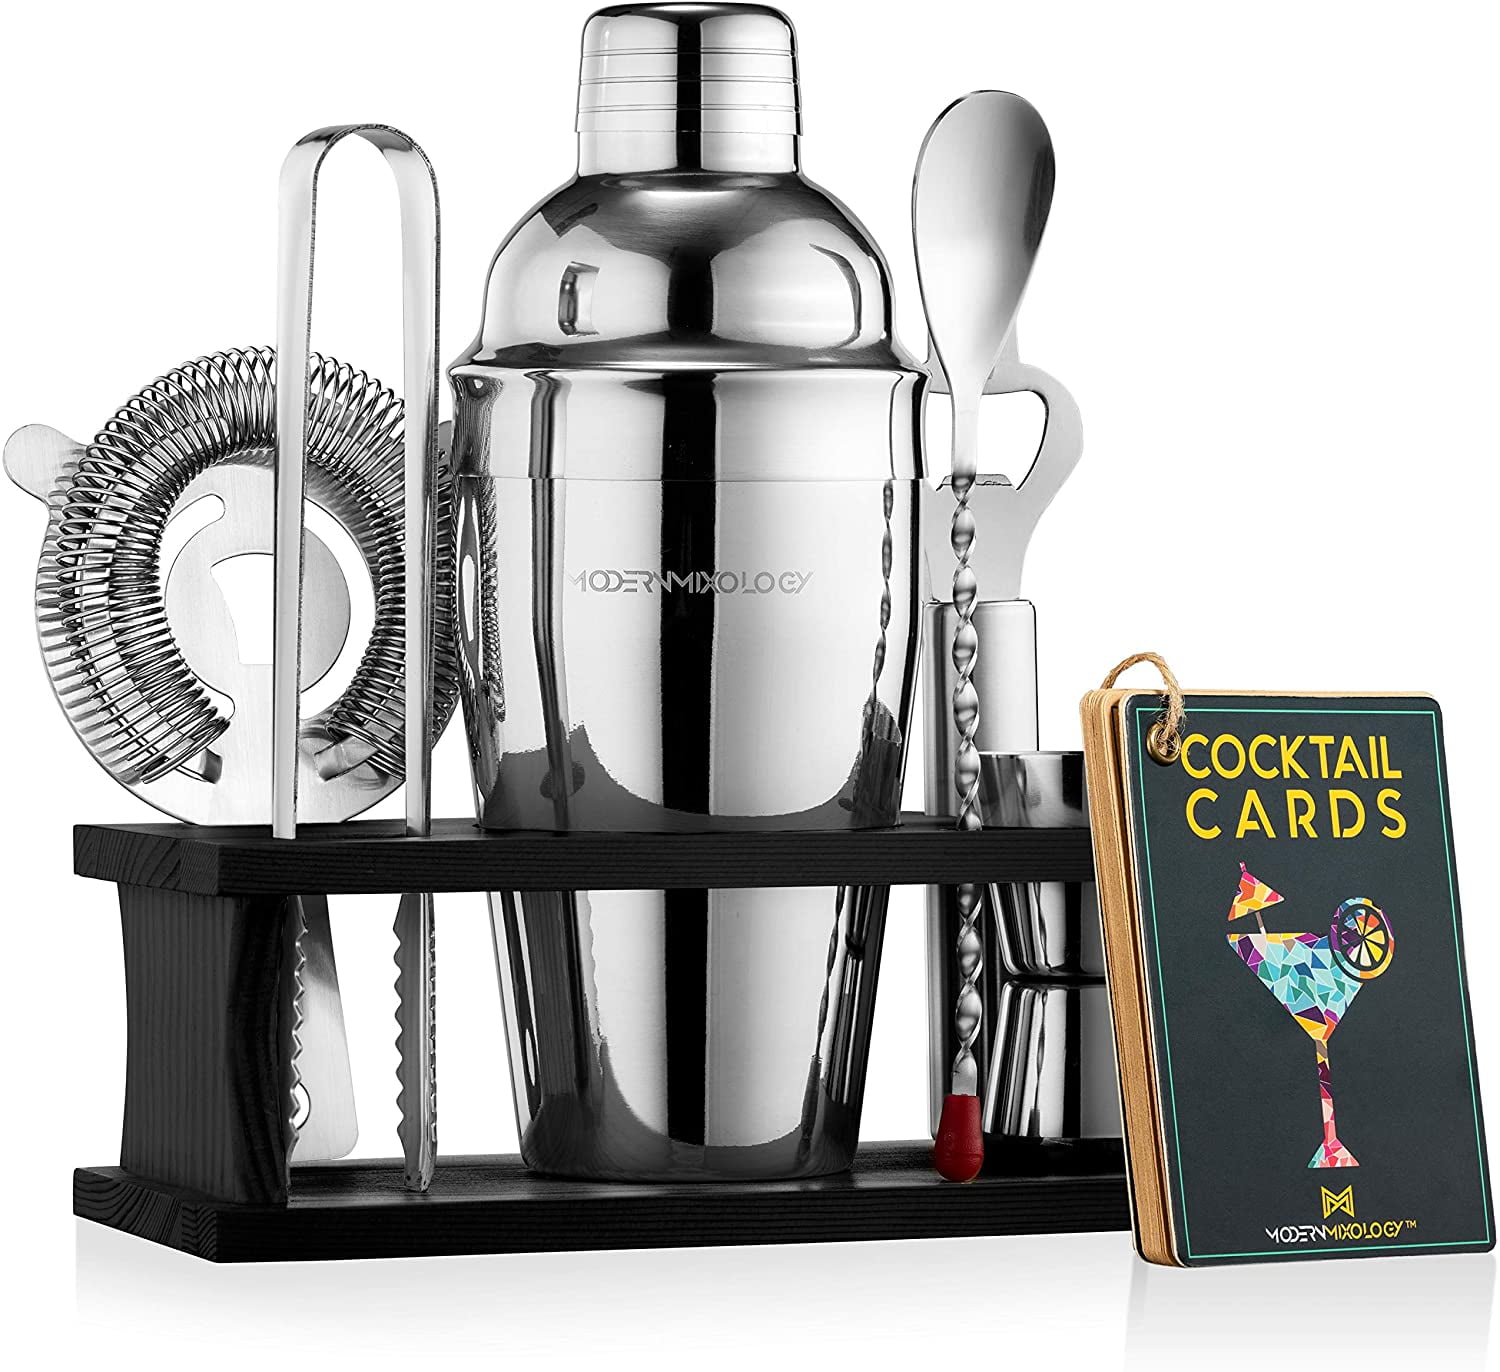 Mixology Bartender Kit with Stand - 15 Piece Bar Tool Set, Silver Bar Set  Cocktail Shaker Set for Drink Mixing - Includes Martini Shaker, Jigger